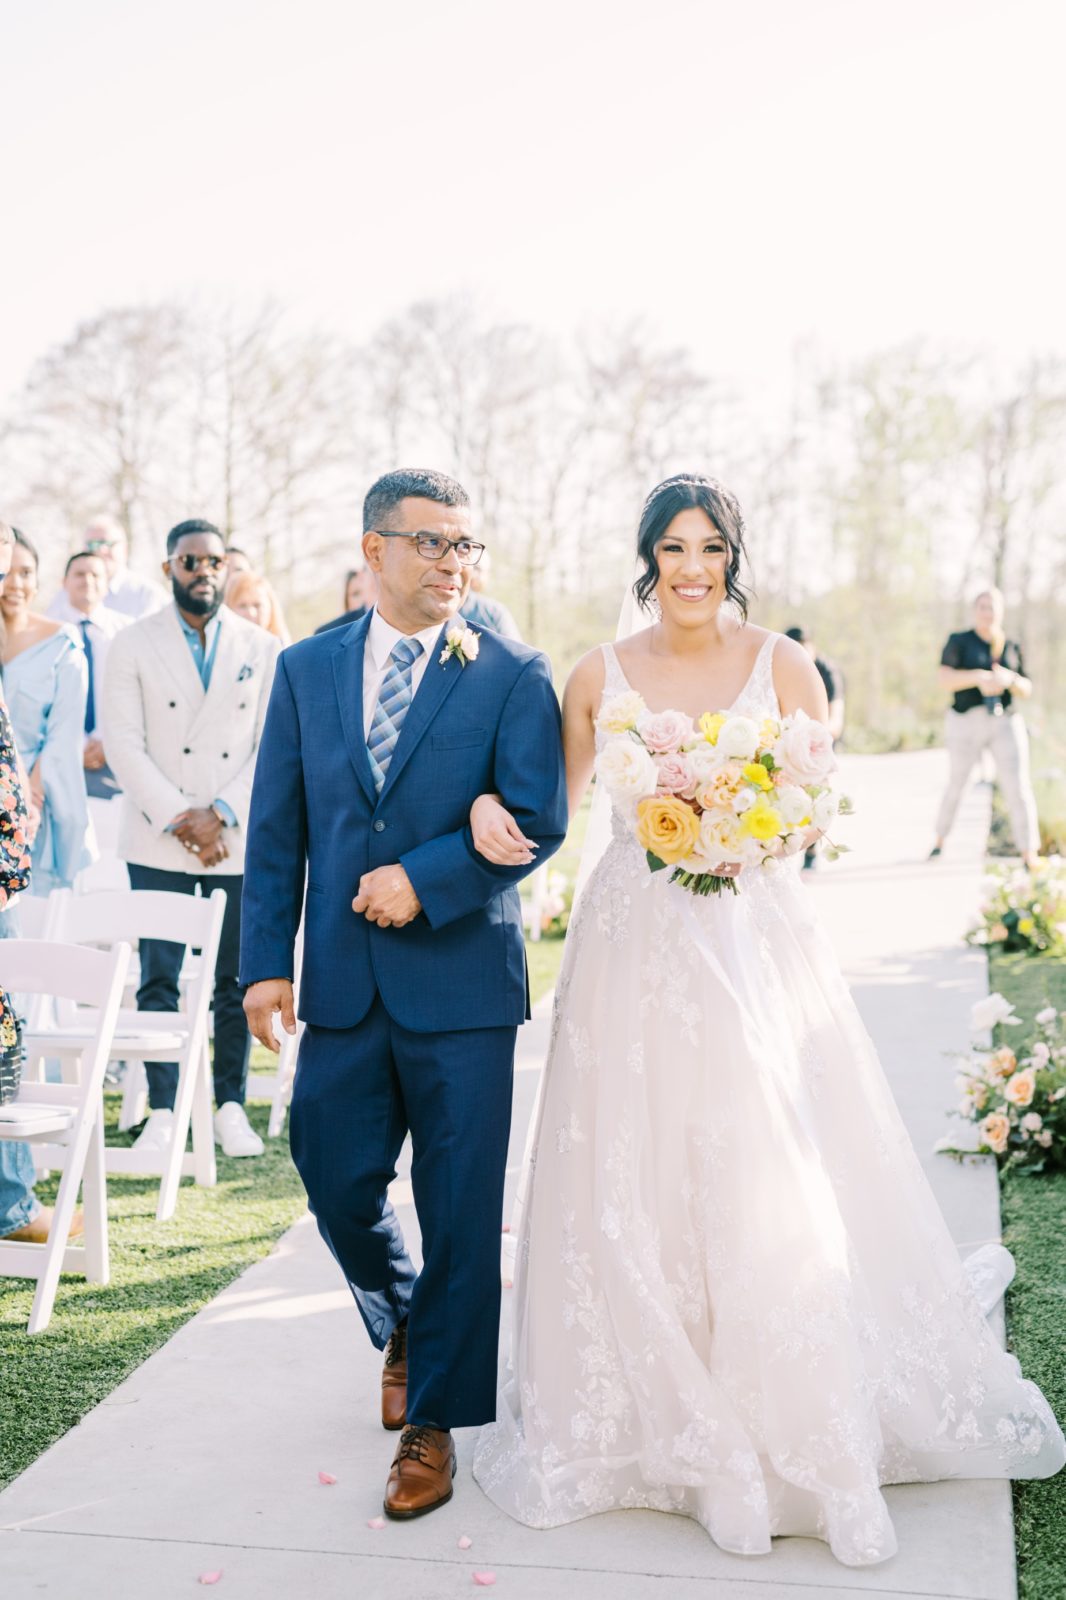 Houston wedding photographer, Christina Elliott Photography captures a bride walking down the aisle with her father. here comes the bride #ChristinaElliottPhotography #ChristinaElliottWeddings #Houstonwedding #TheSpringsVenue #EastHoustonweddings